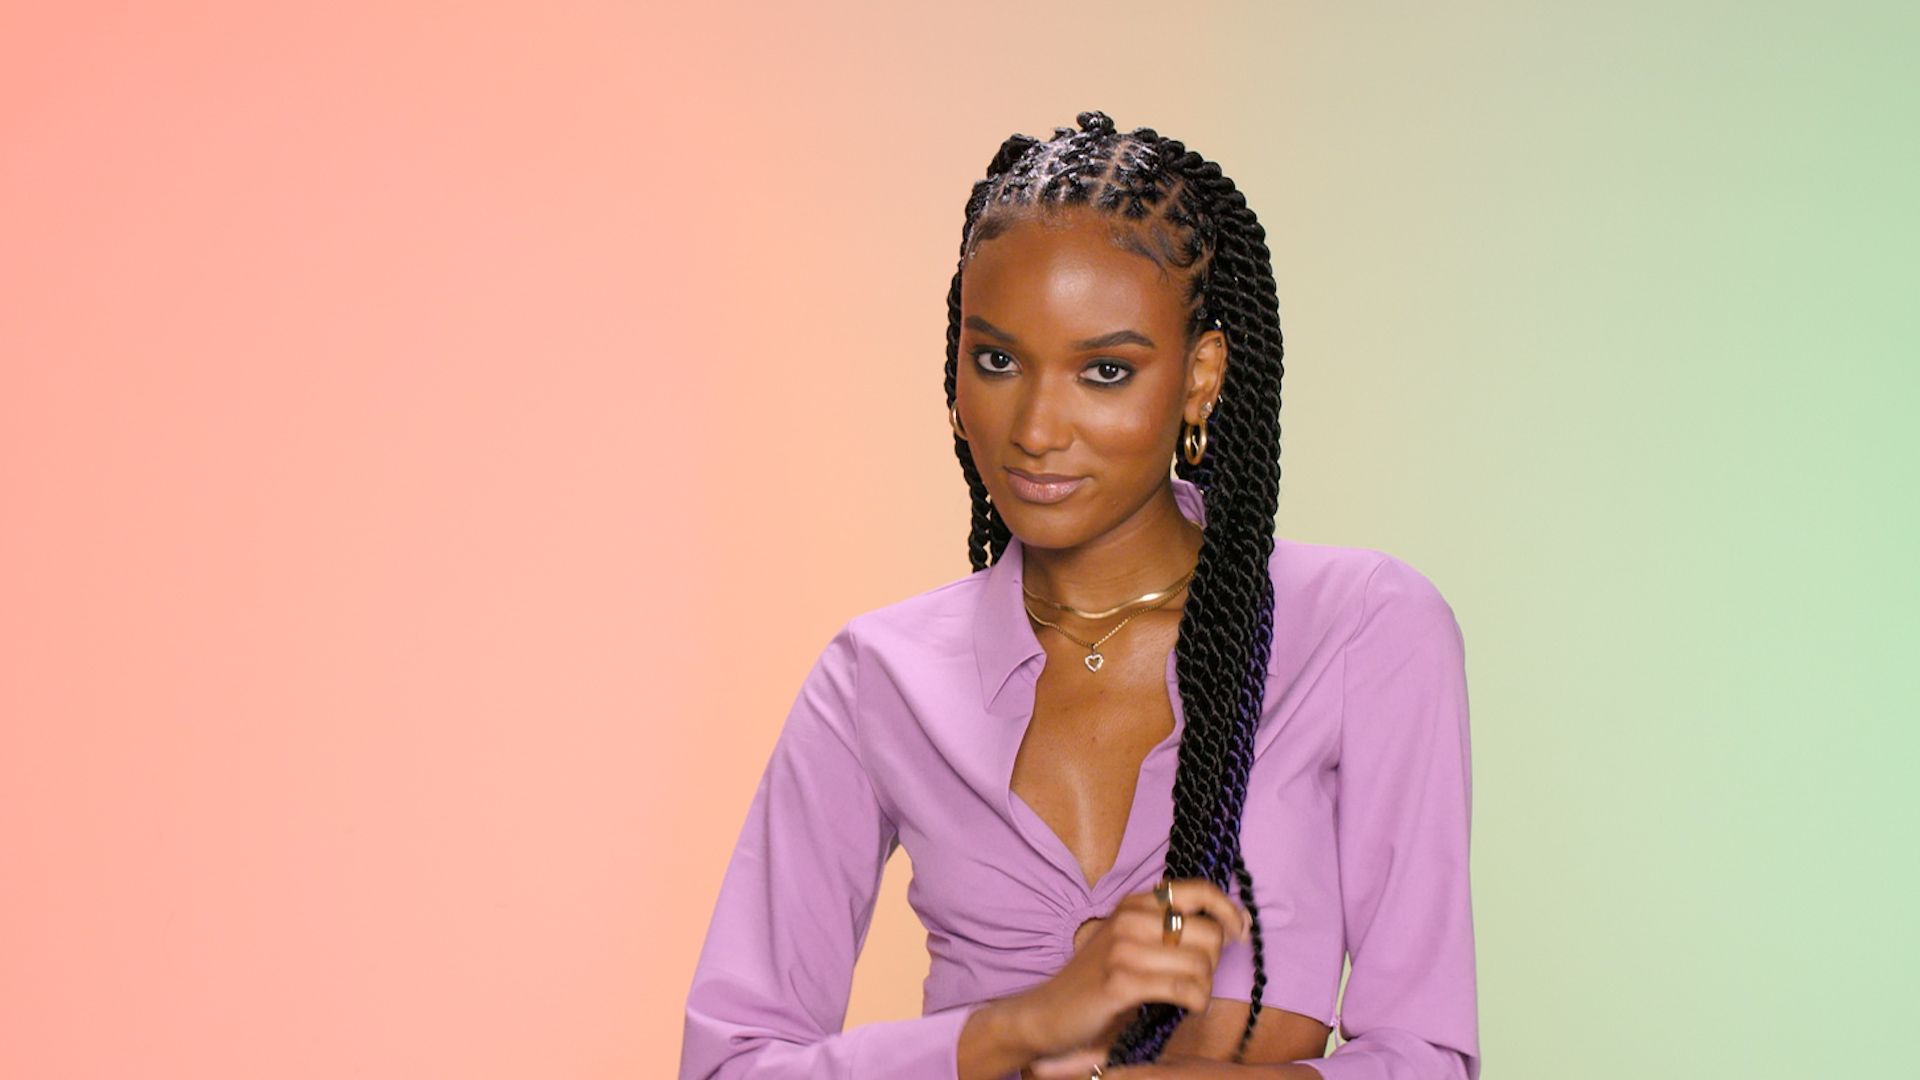 The Braid Up': How to Do Rubber Band Senegalese Twists